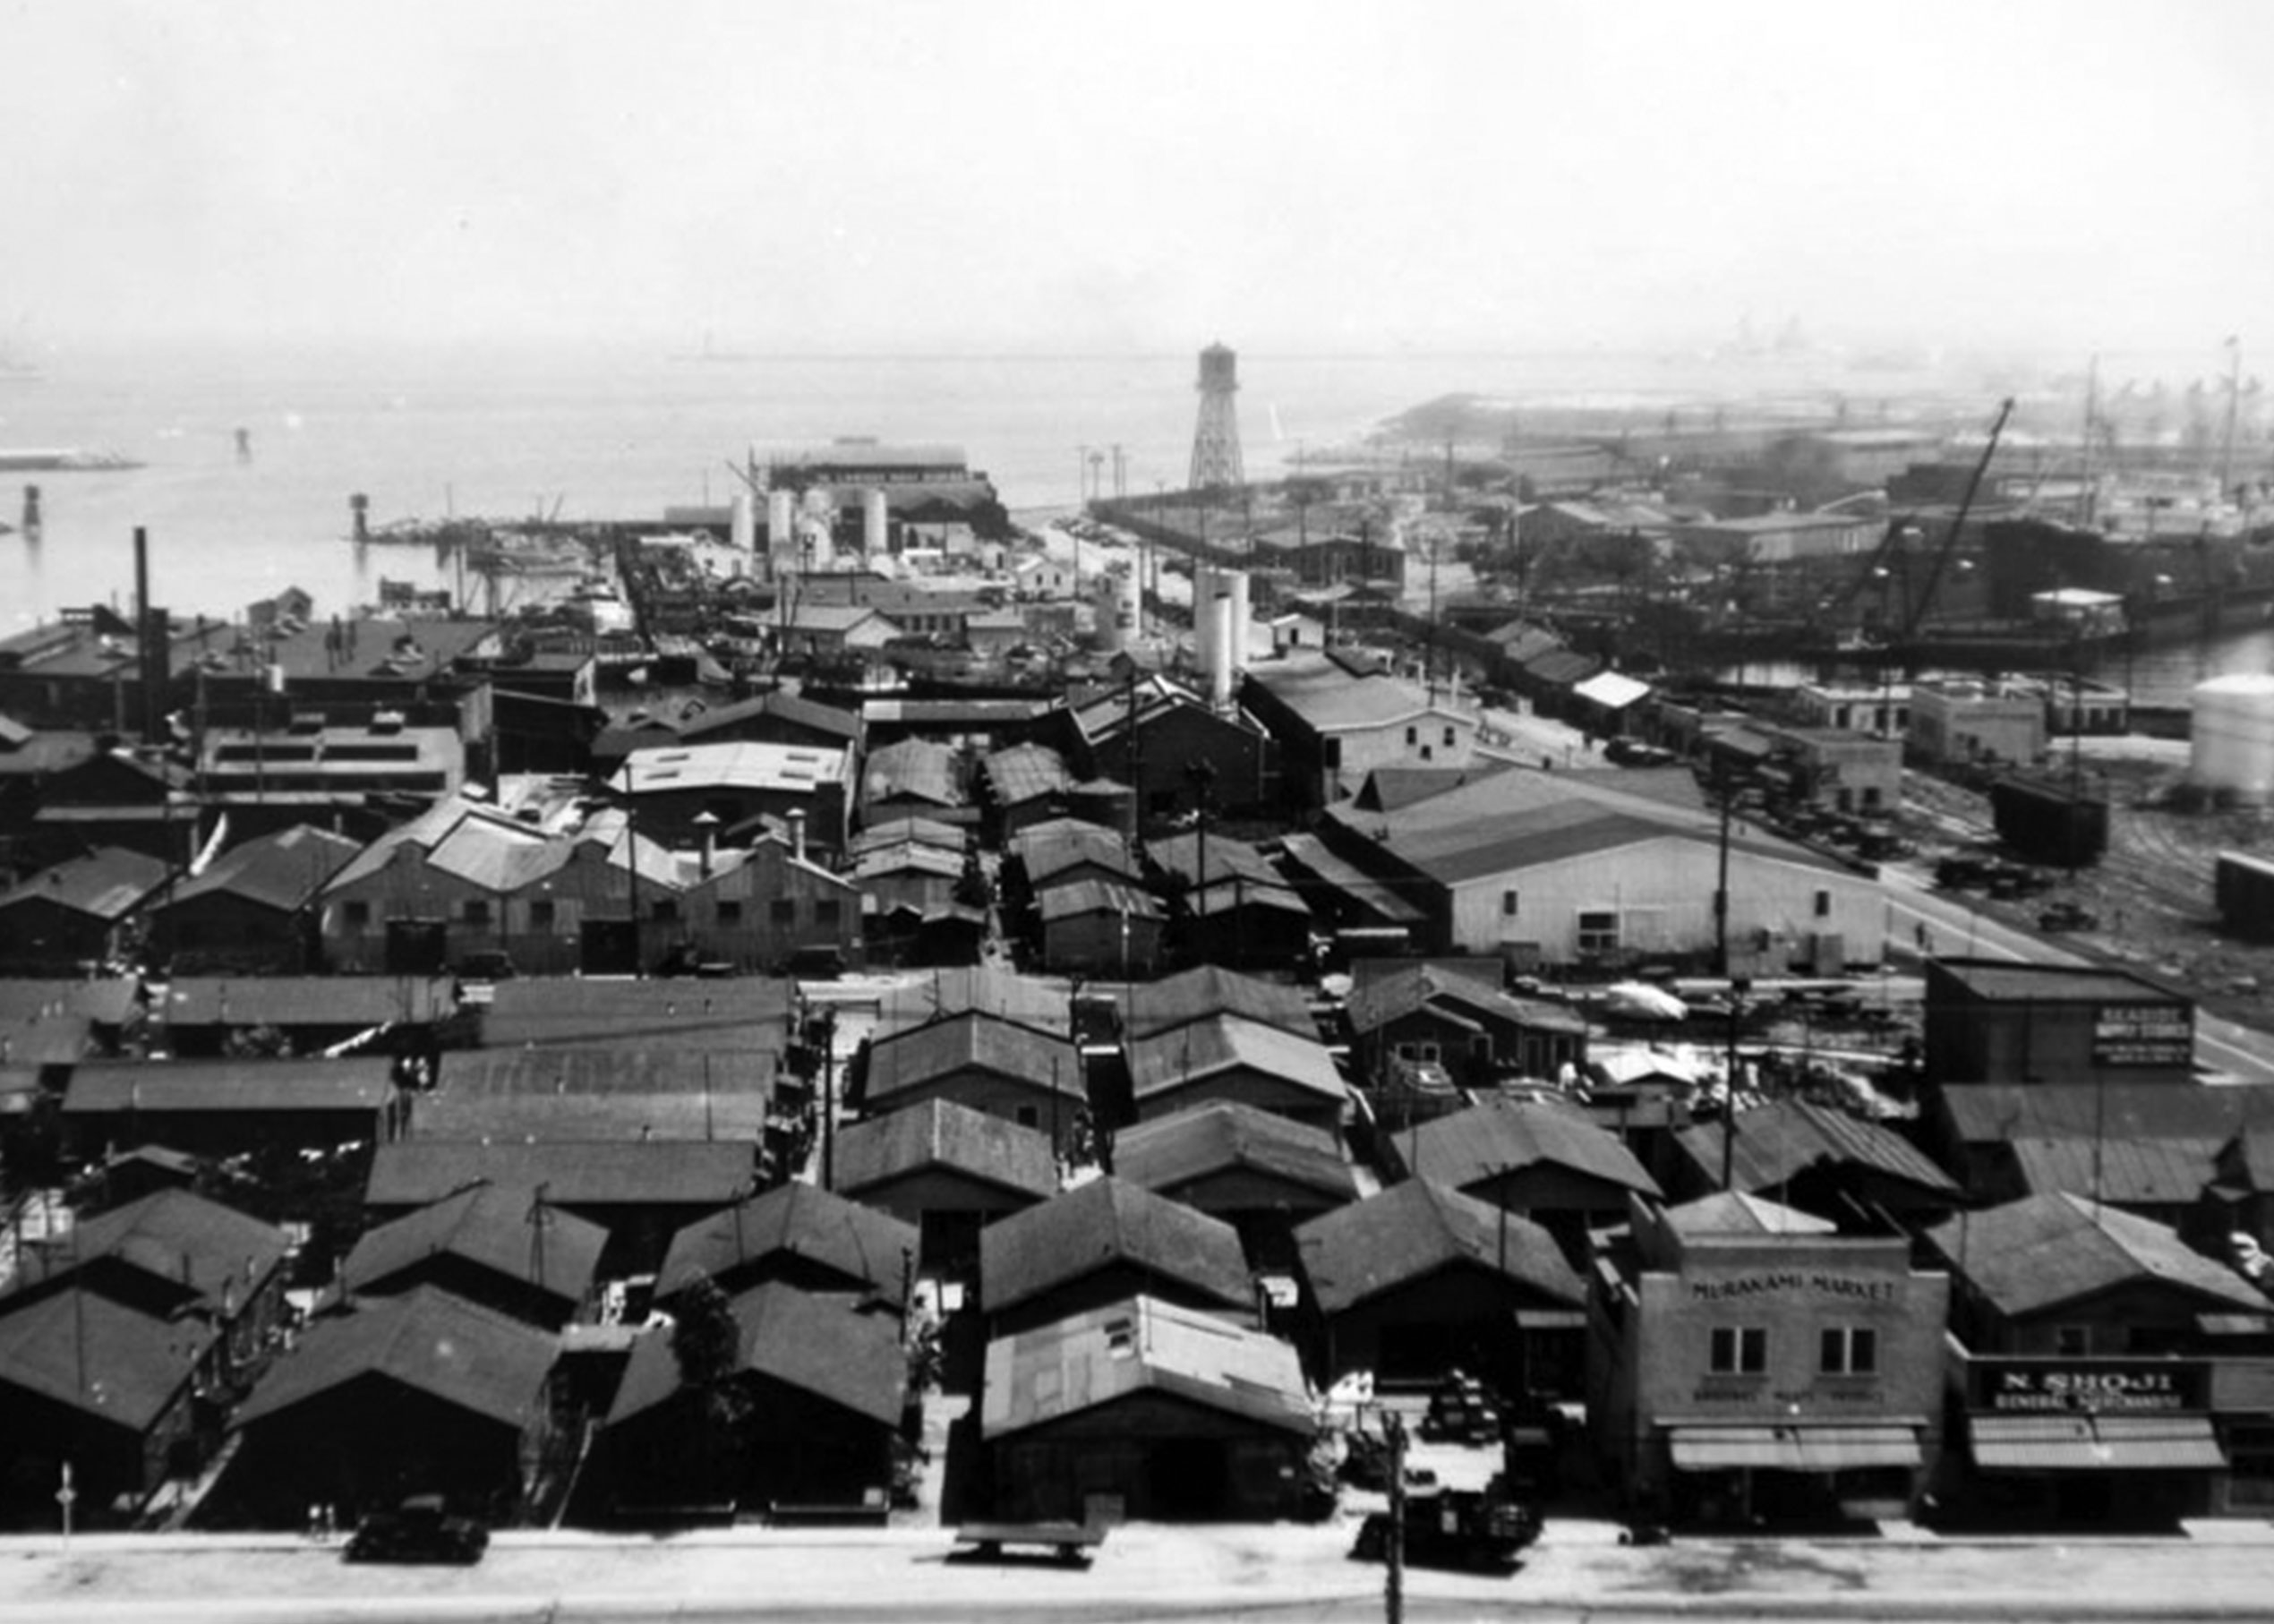 Japanese Village on Terminal Island before WWII